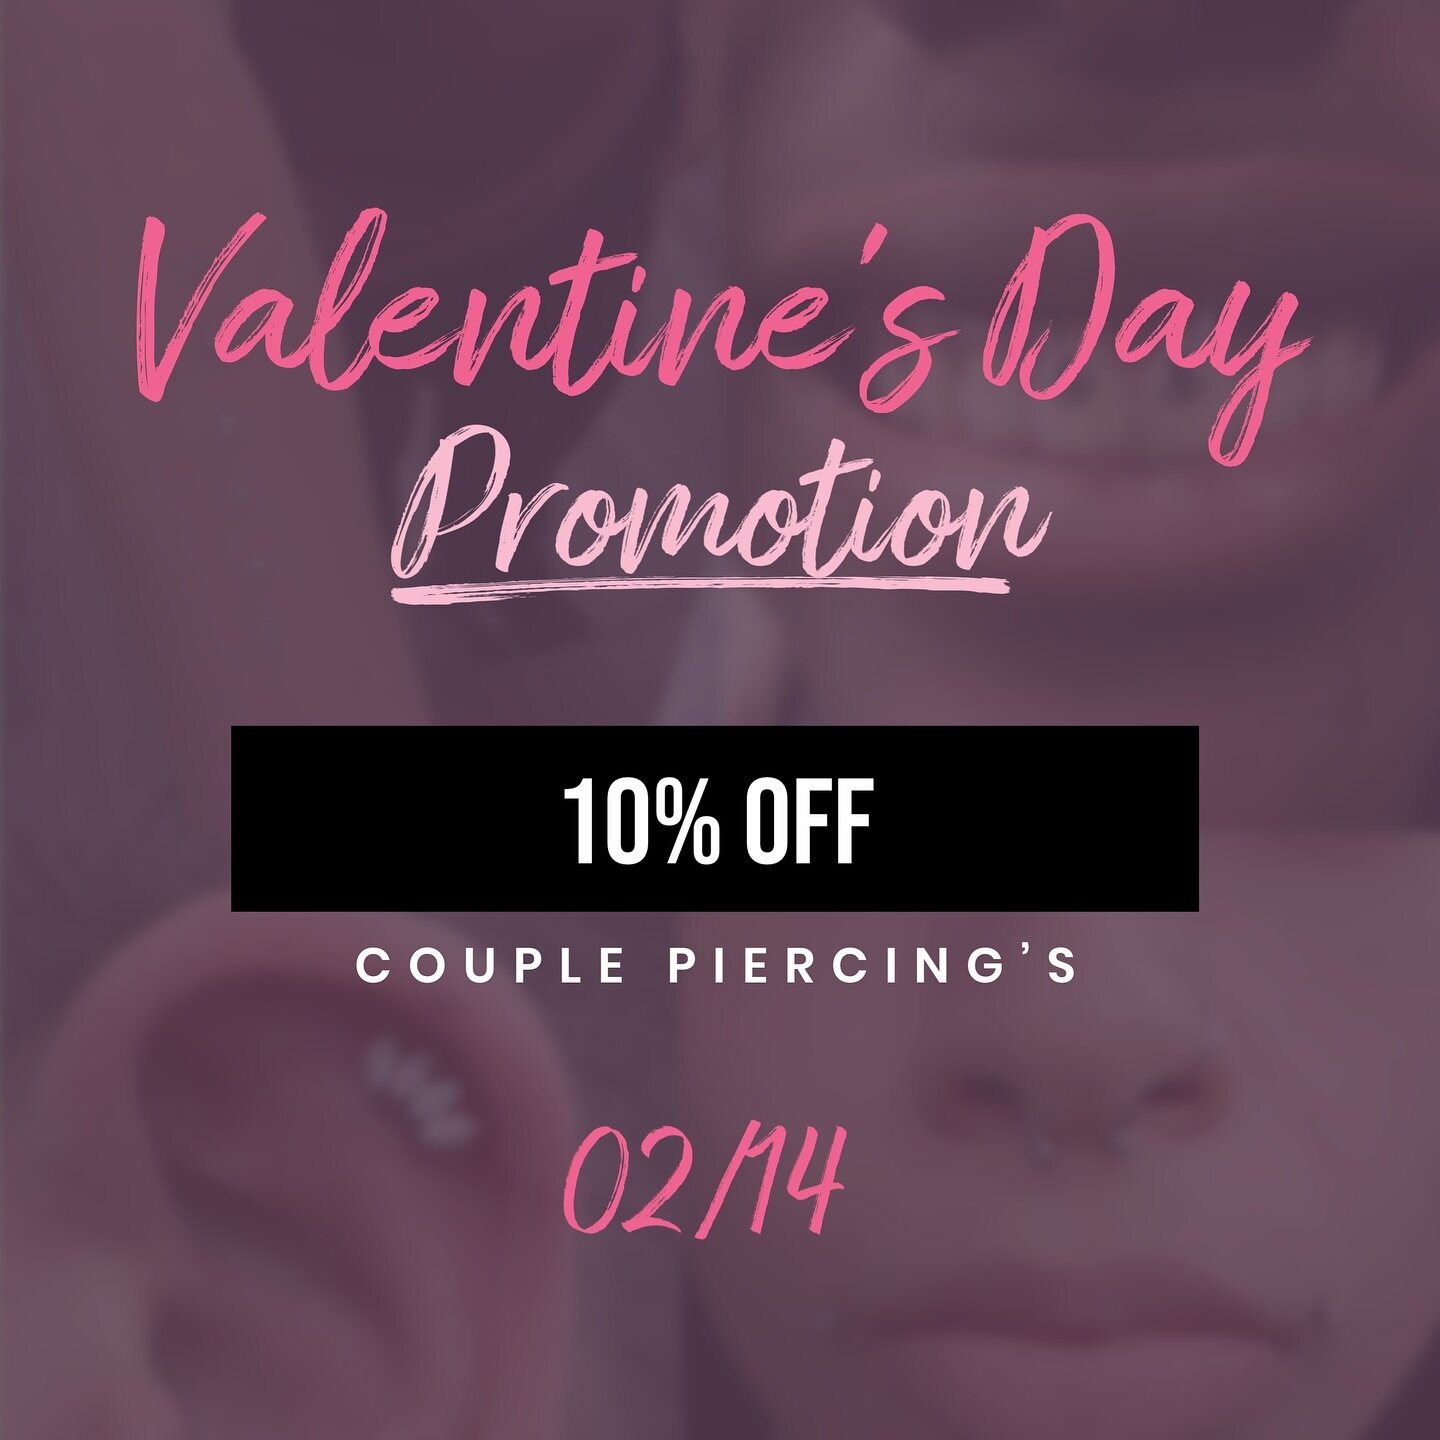 Couple Piercing&rsquo;s Alert 🚨 Wednesday February 14th.

This Valentine&rsquo;s Day we are offering a 10% discount (on the lowest priced item for each person of the couple). Come get pierced with a friend, partner, spouse, or family member and save